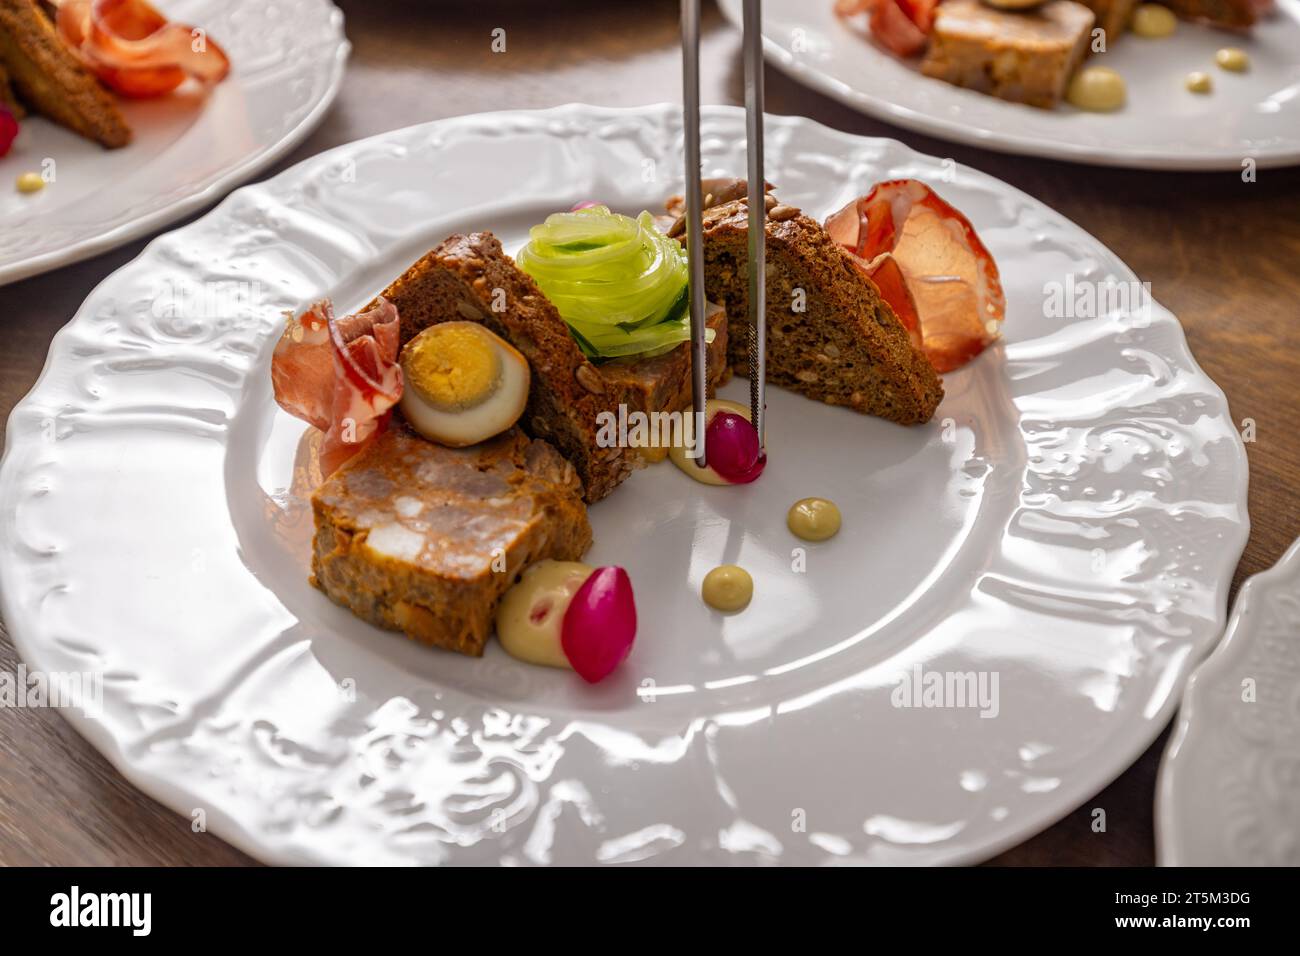 Scene encapsulates the art of culinary presentation in a professional kitchen setting. Stock Photo